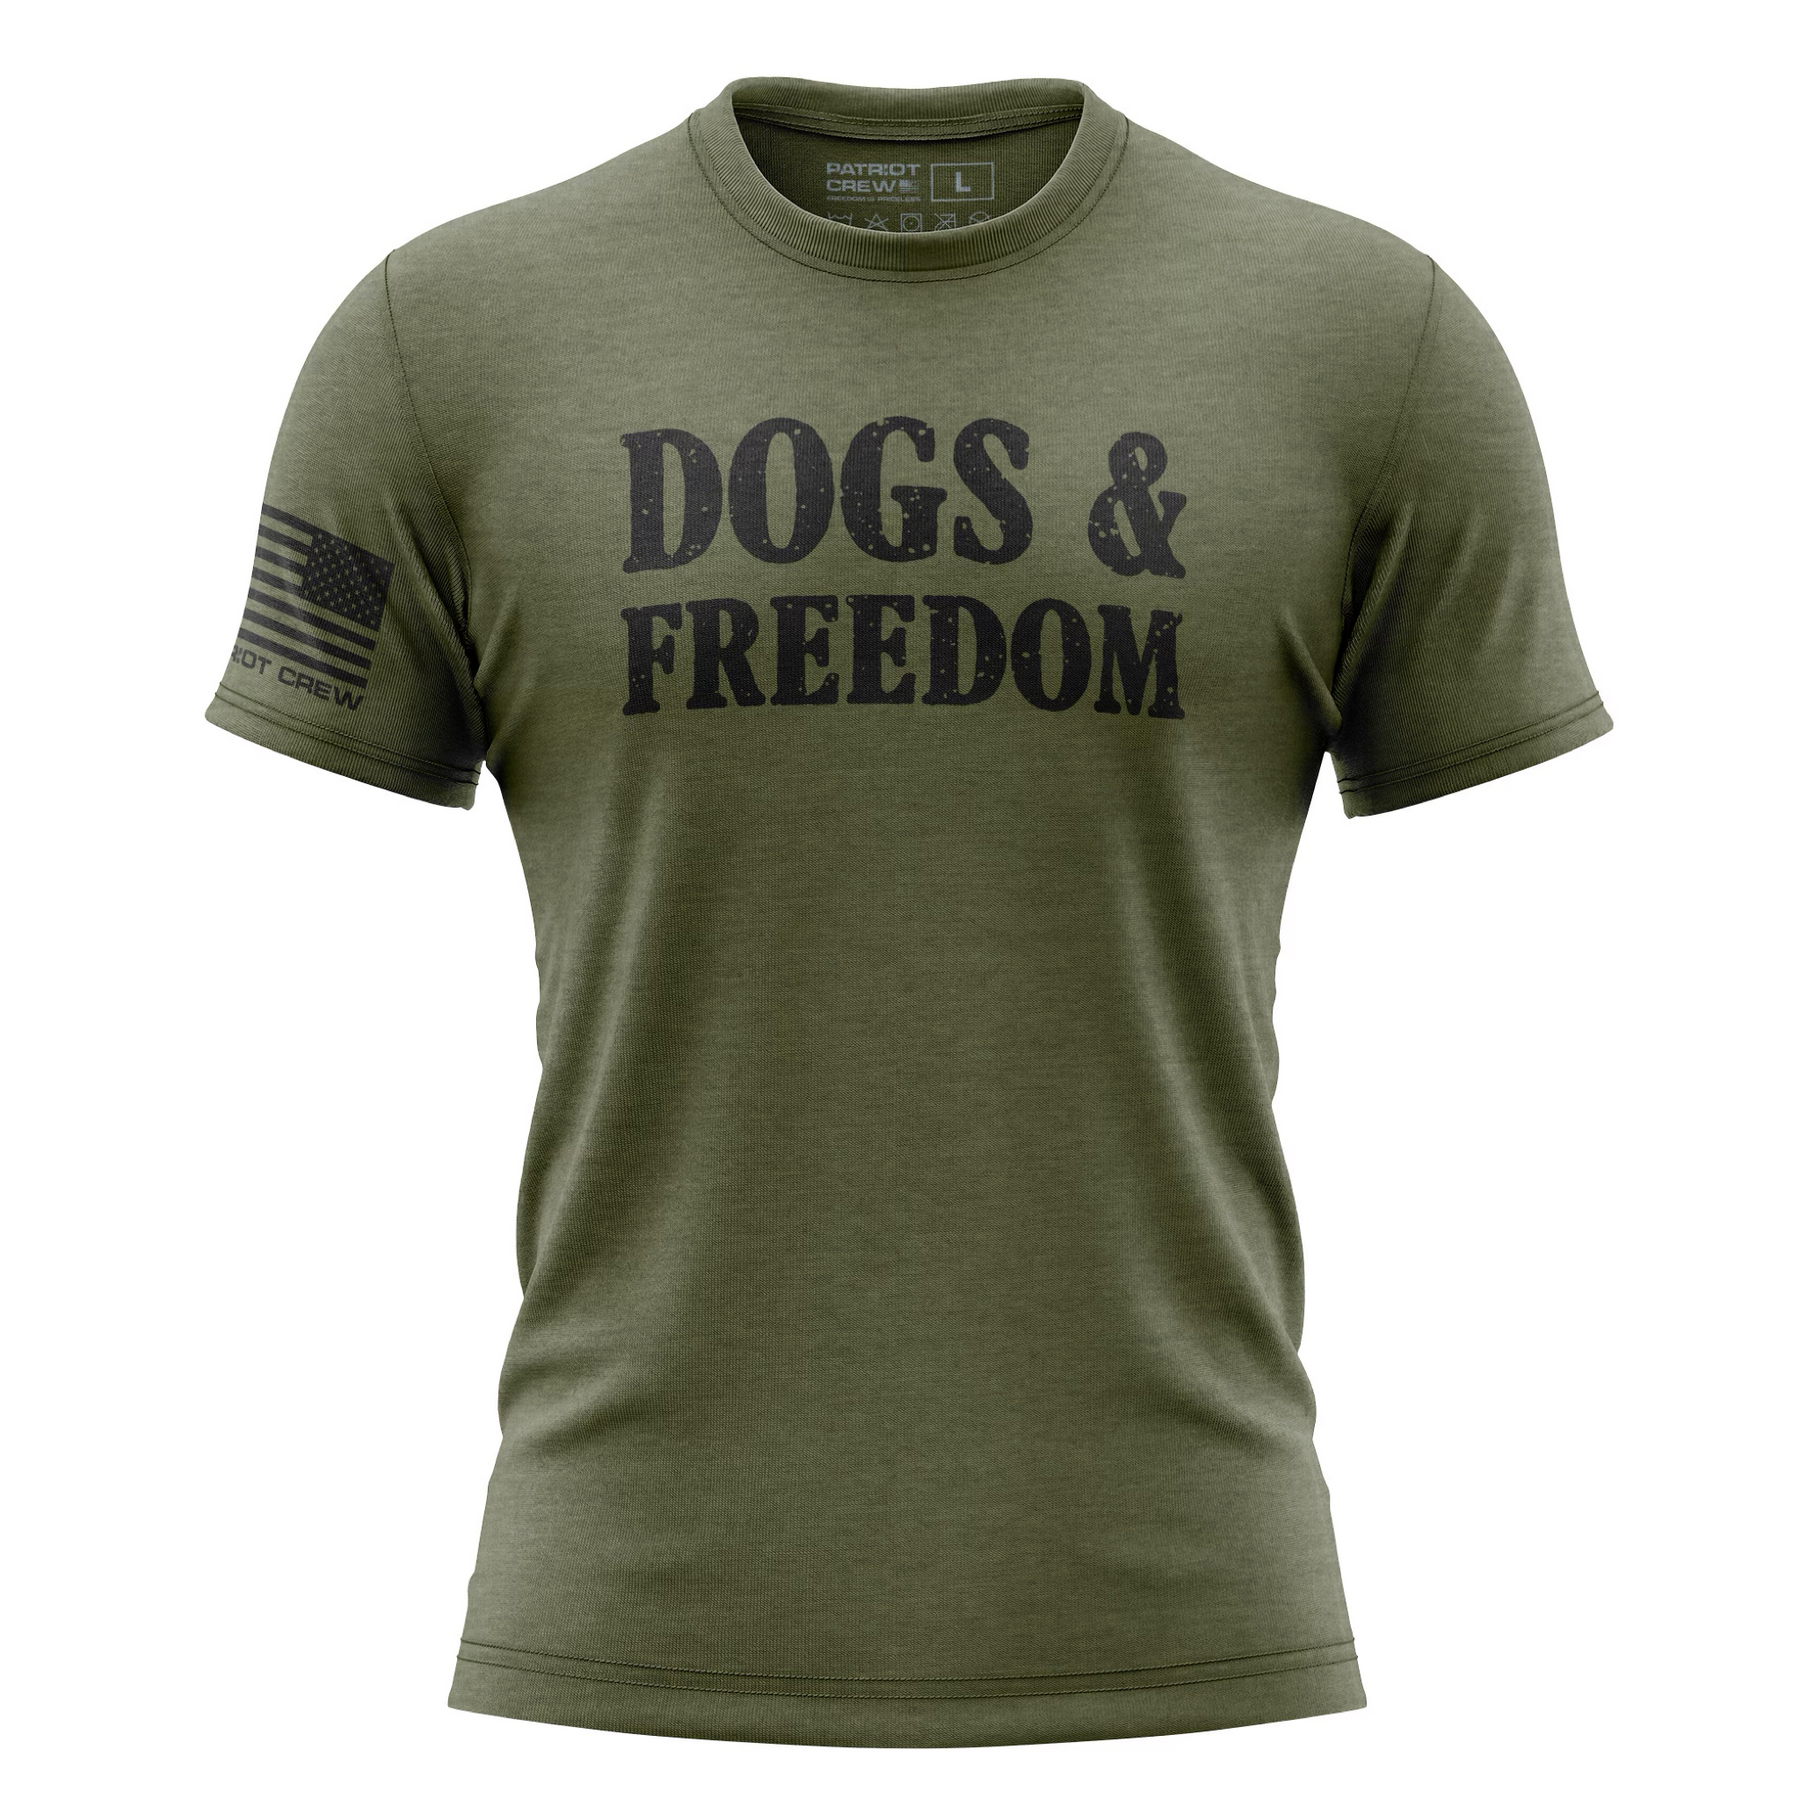 Dogs & Freedom T-Shirt